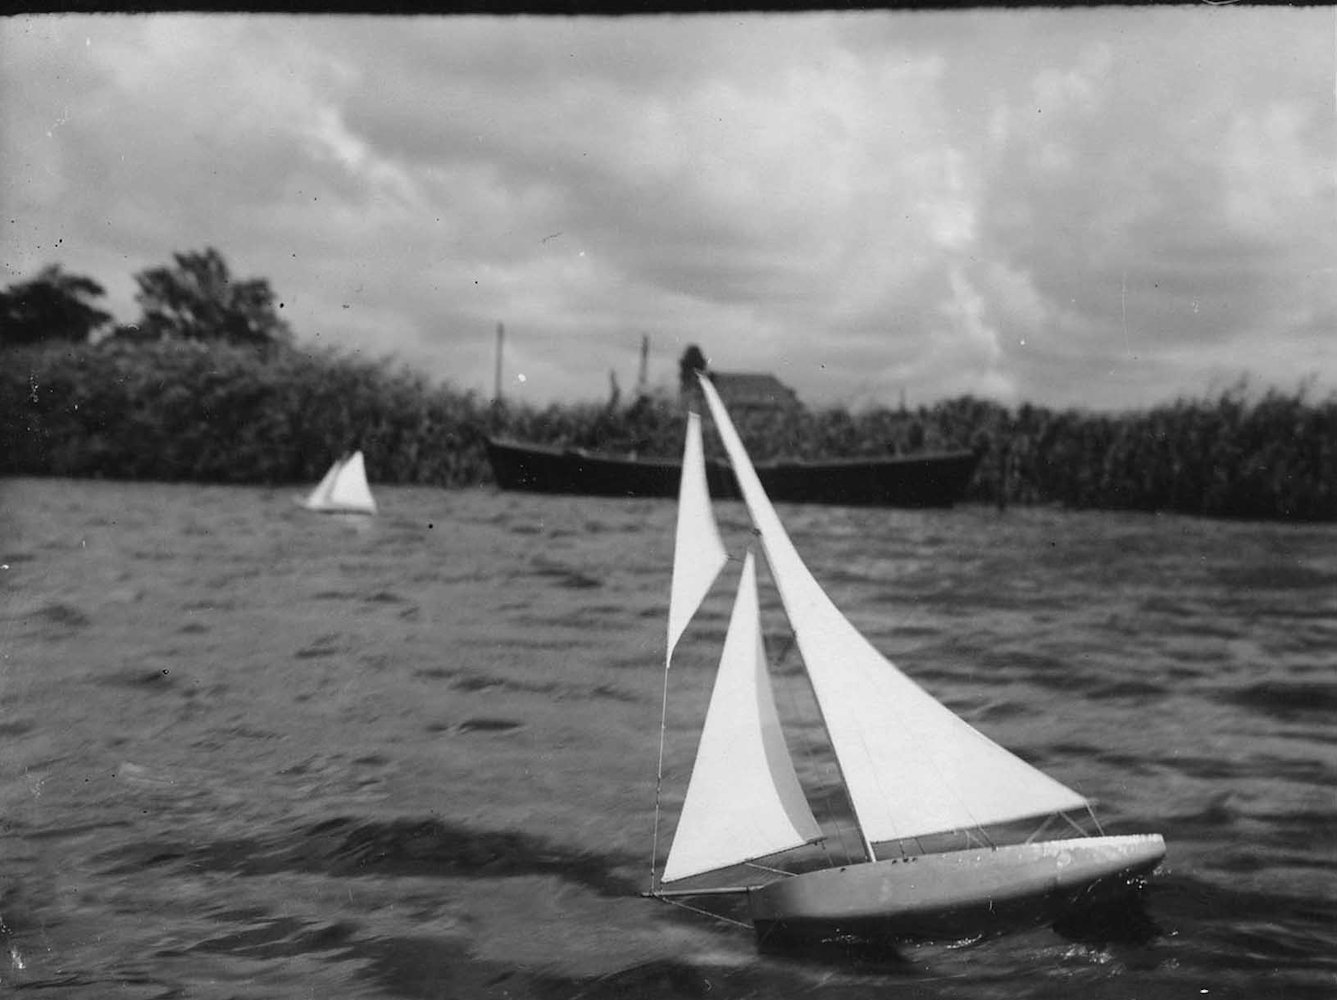 Model Yachts by Lyonel and Lux Feininger I